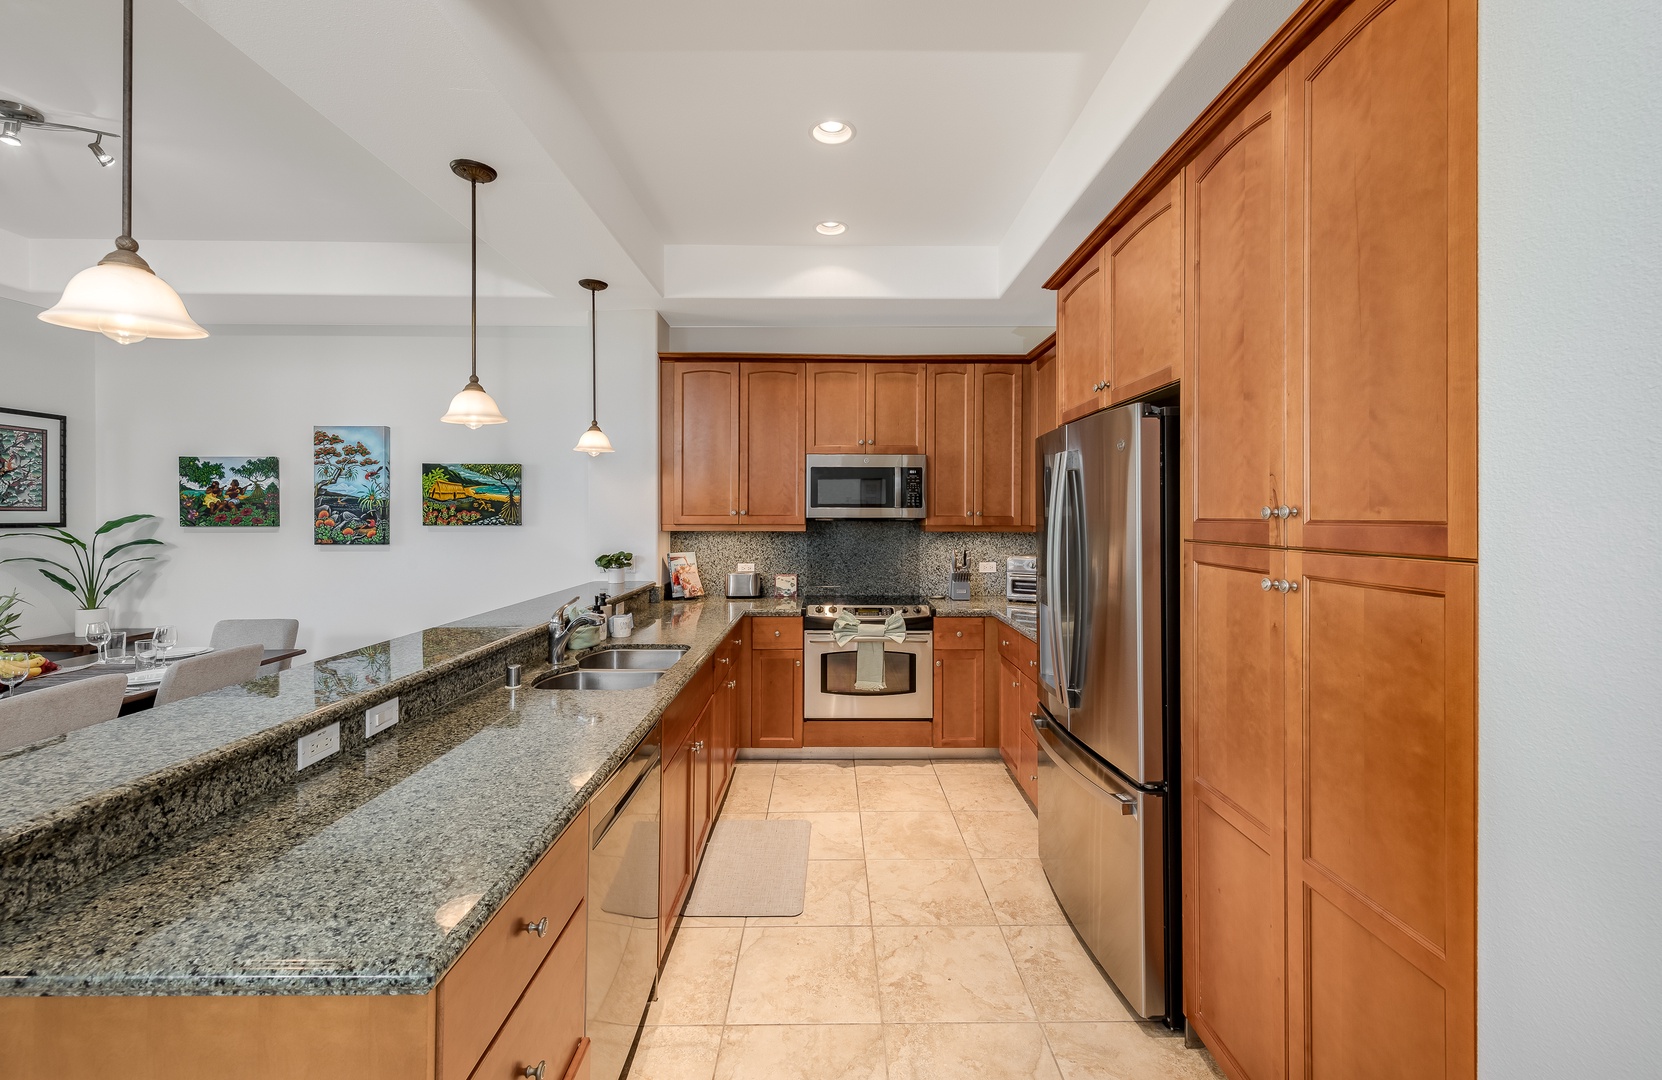 Kamuela Vacation Rentals, Mauna Lani Fairways #603 - Ample kitchen tools and appliances for your meal prep.